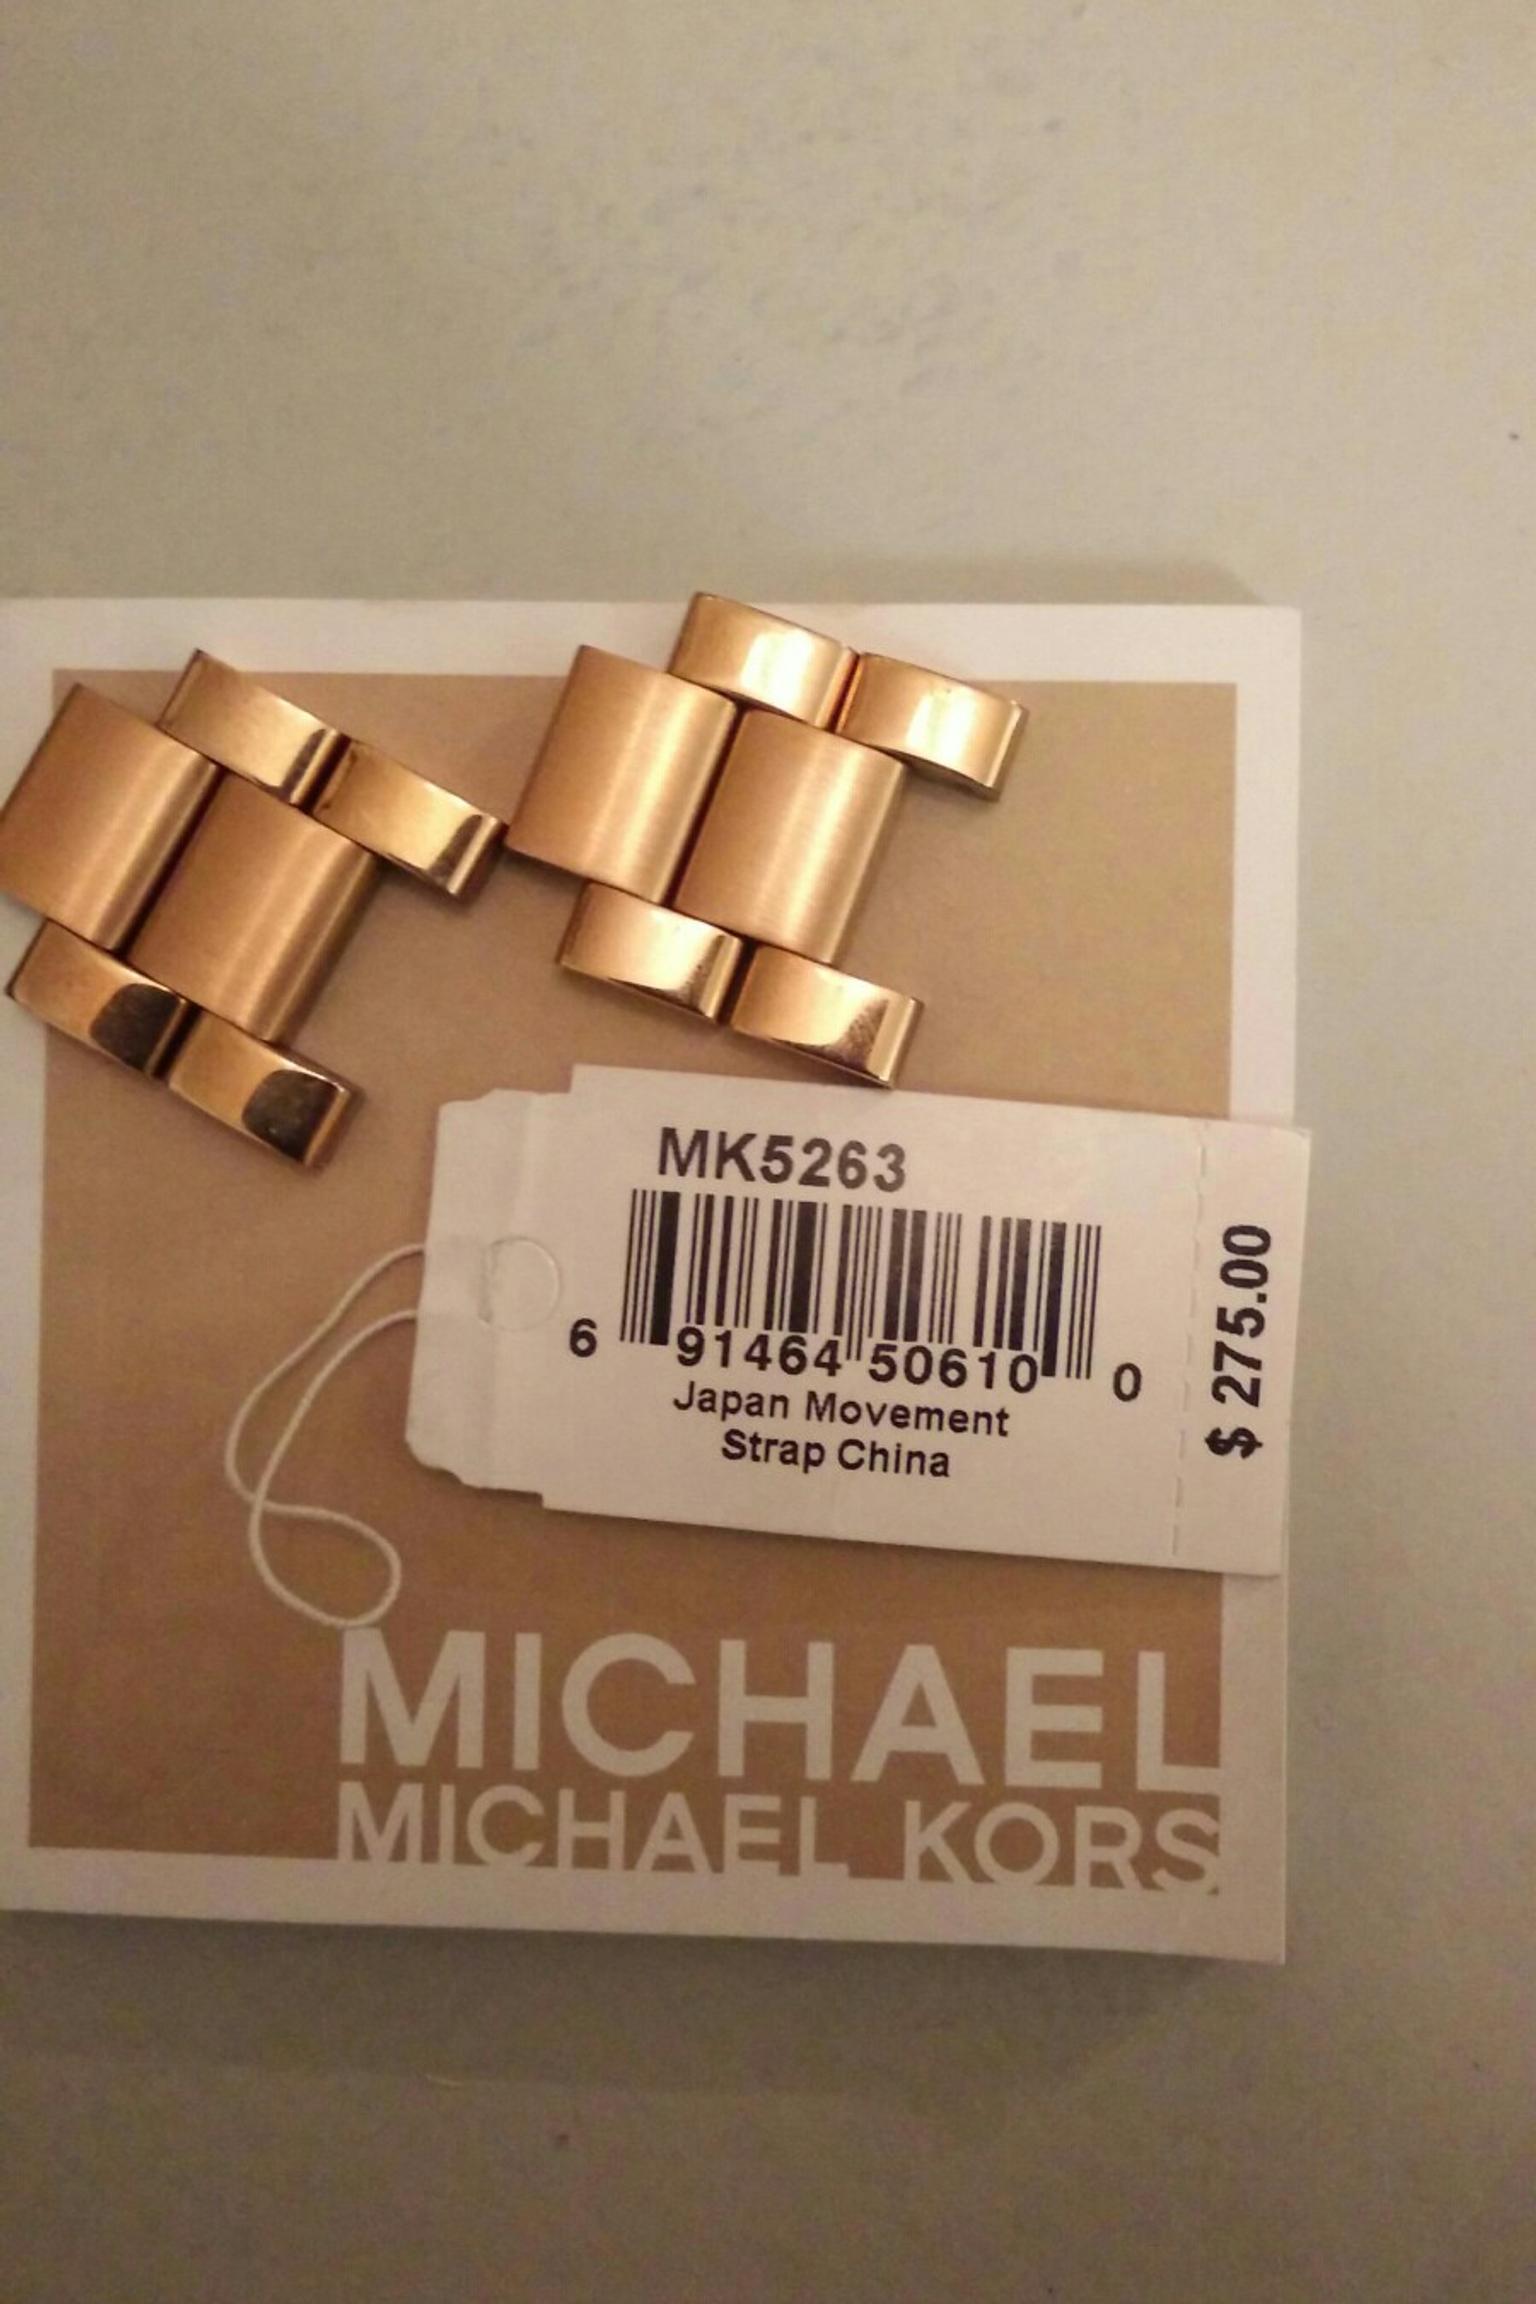 michael kors watches with mk logo inside